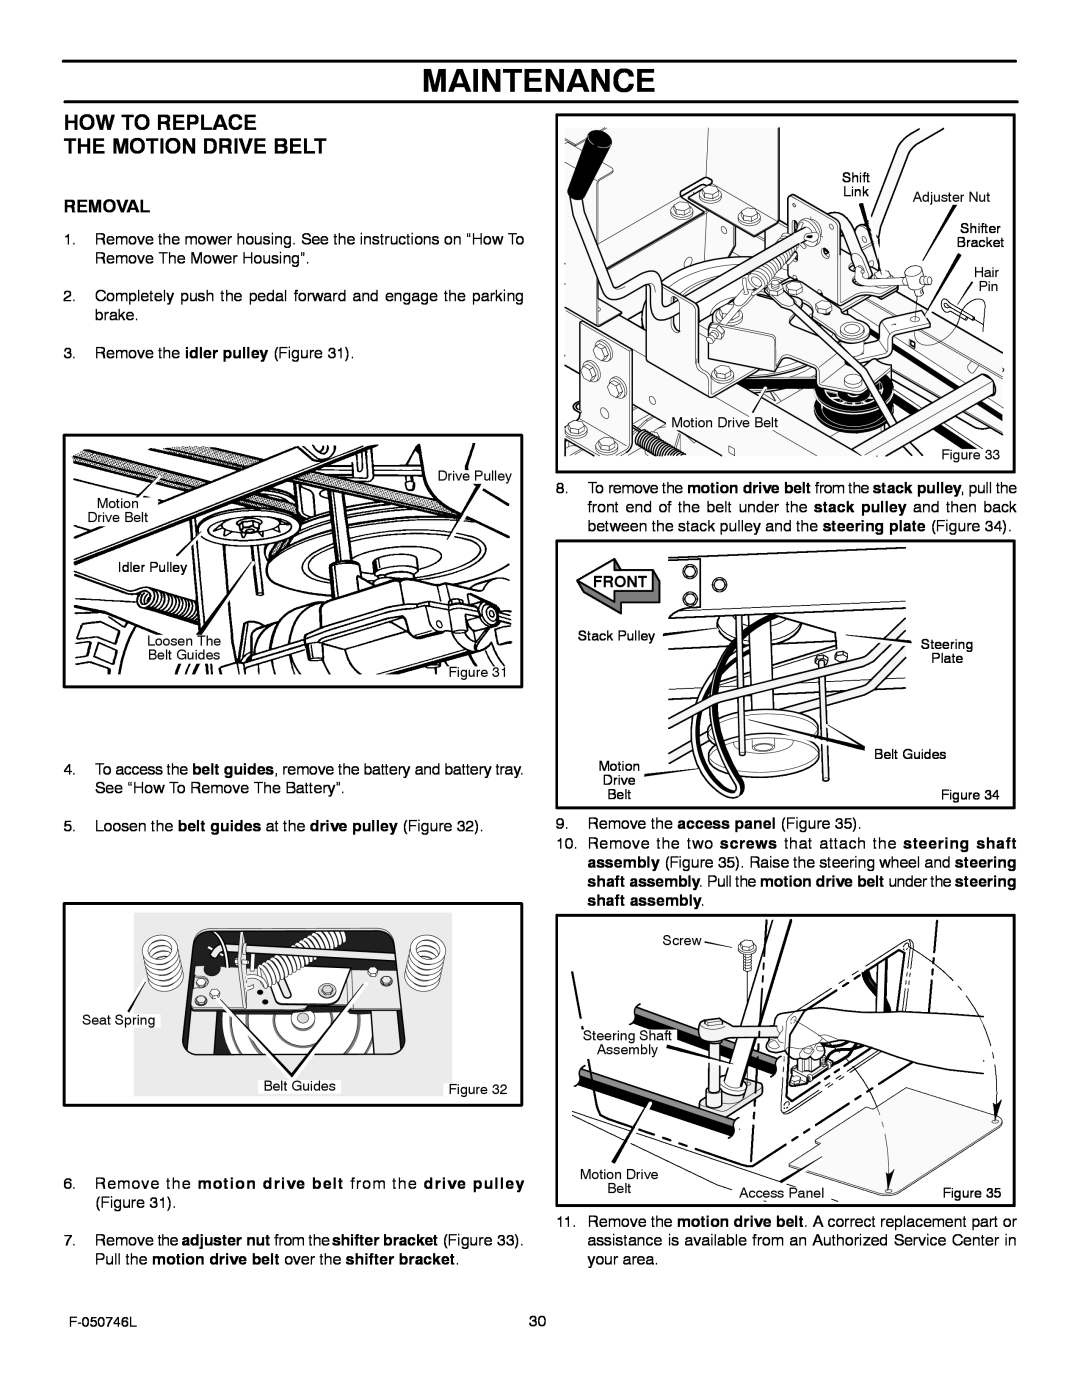 Murray 425016x48A manual Maintenance, How To Replace The Motion Drive Belt, Removal 